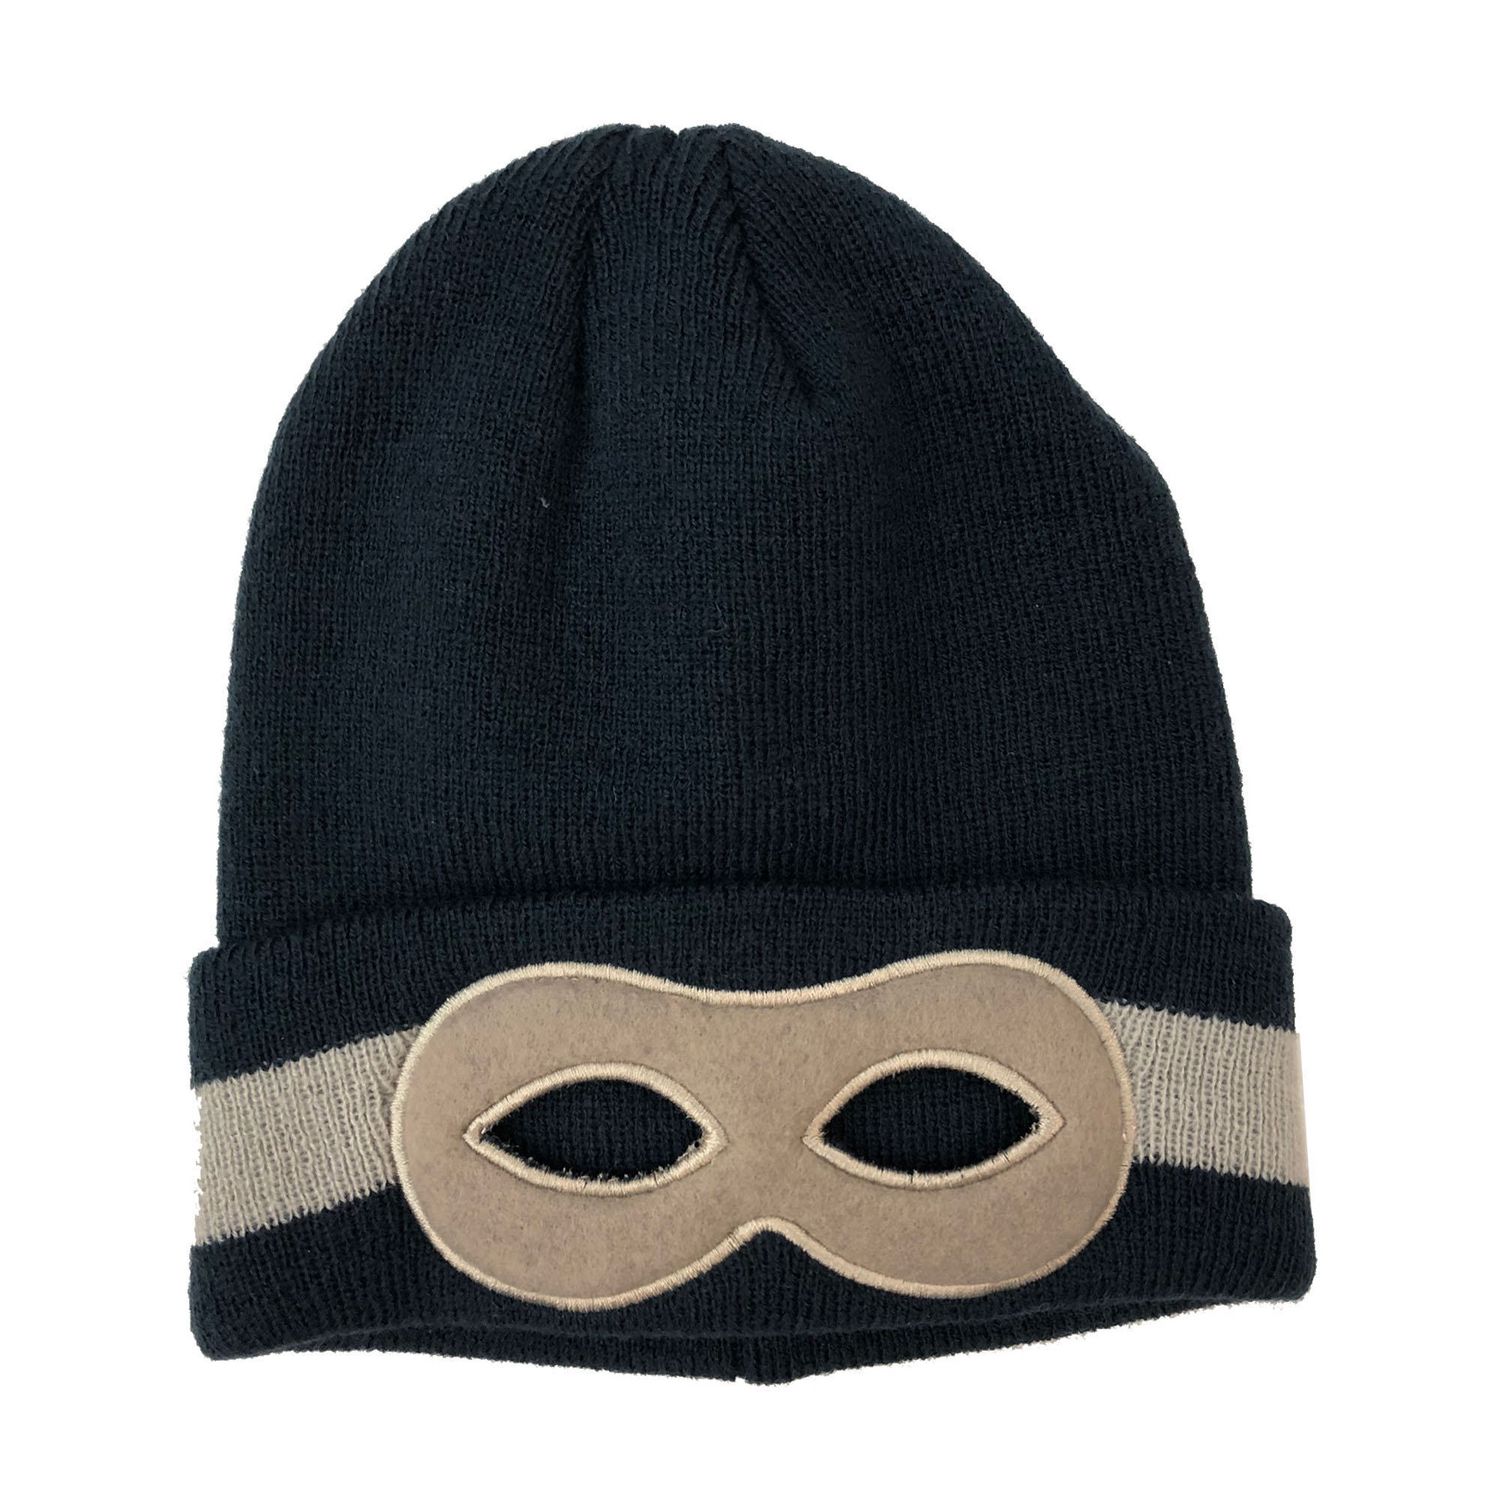 Hat with Mask for Boys by George | Walmart Canada